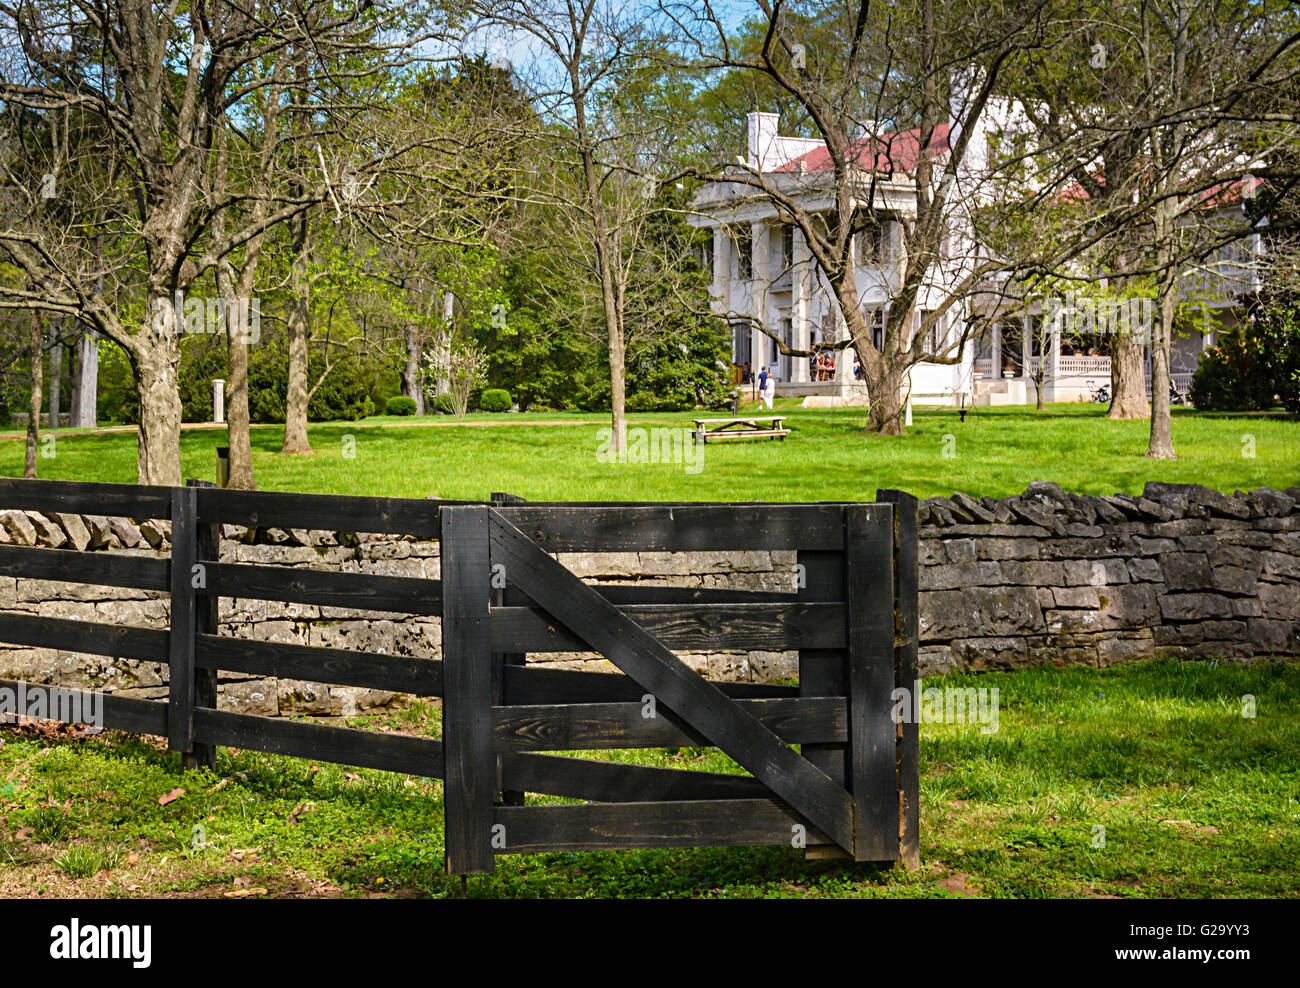 Tourists enjoy the Belle Meade Plantation Mansion surrounded by old rock walls and wooden fences in Nashville, TN, USA Stock Photo